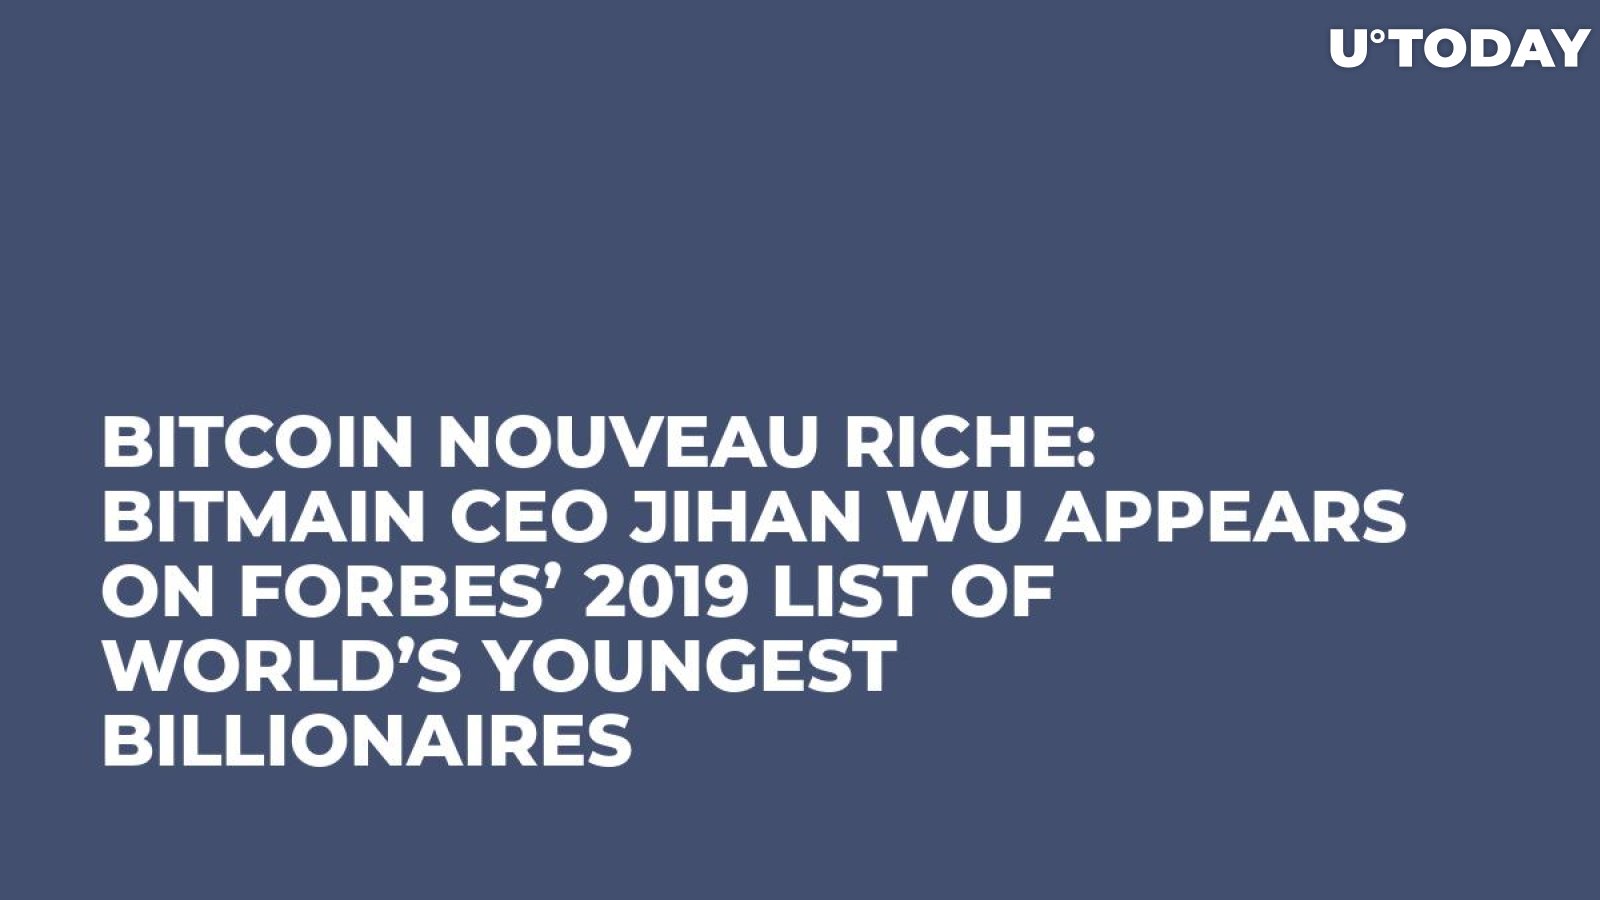 Bitcoin Nouveau Riche: Bitmain CEO Jihan Wu Appears on Forbes’ 2019 List of World’s Youngest Billionaires